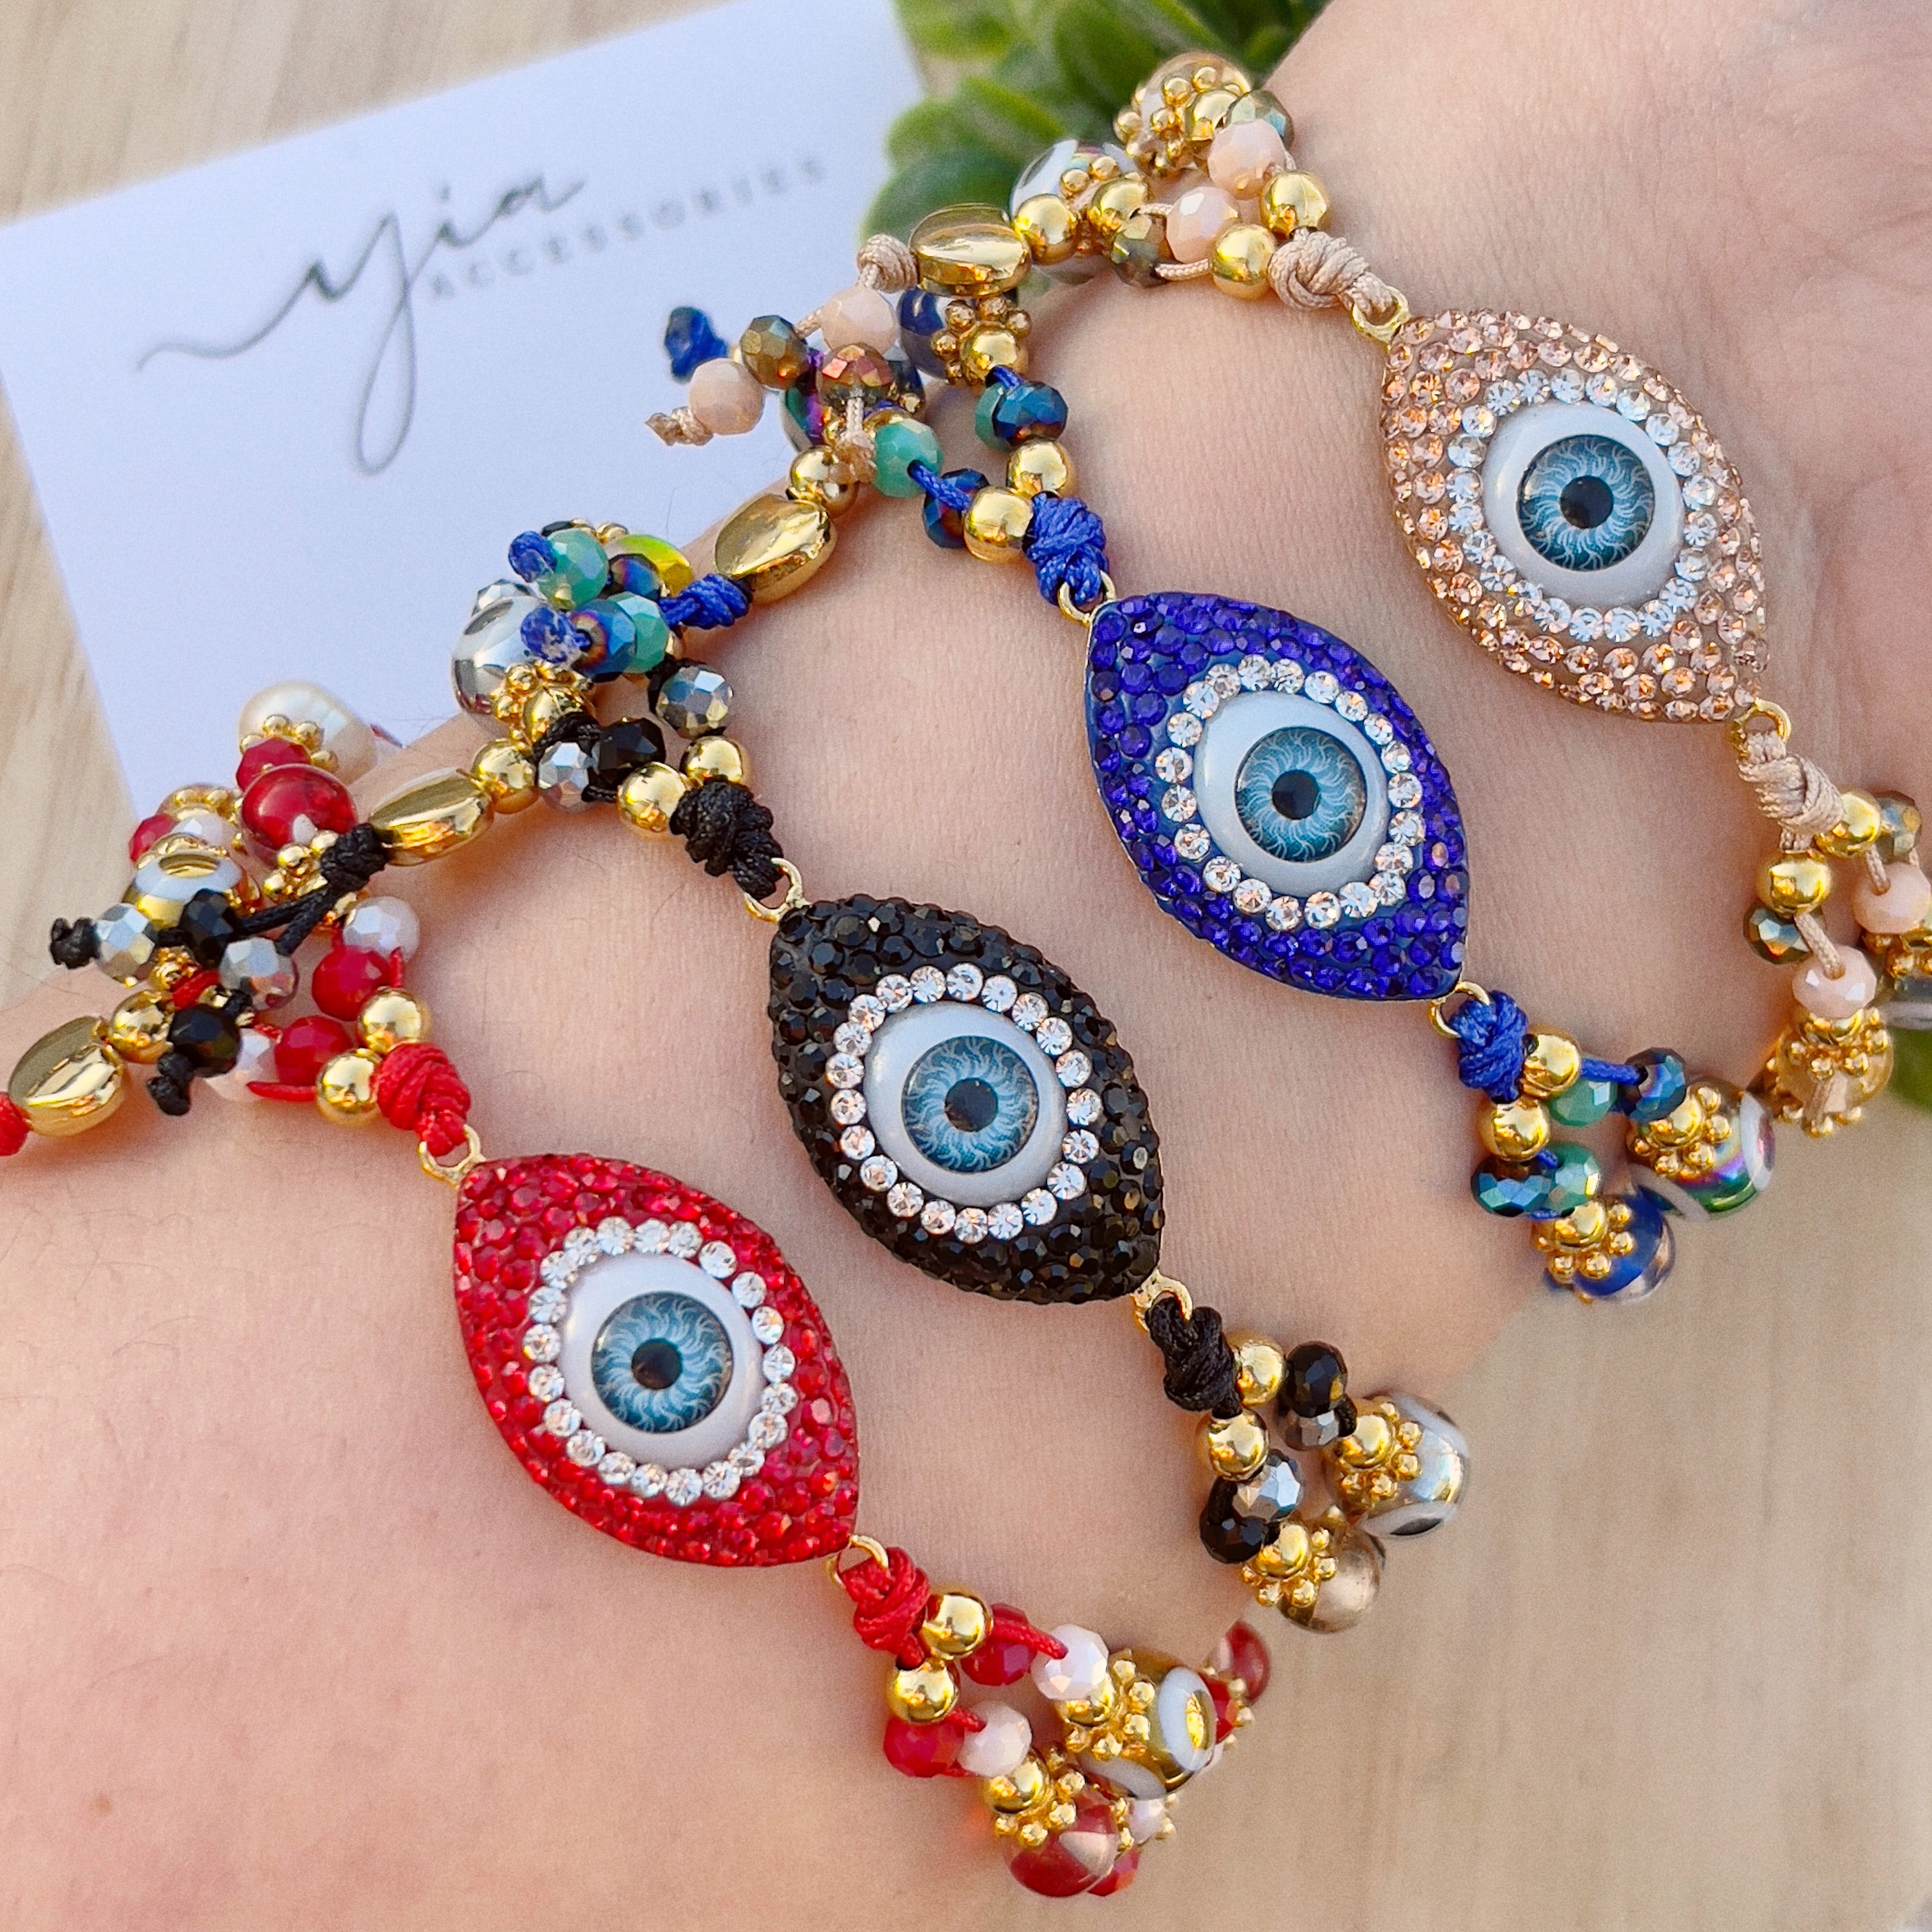 Sparkly Good Vibes – Yia Accessories